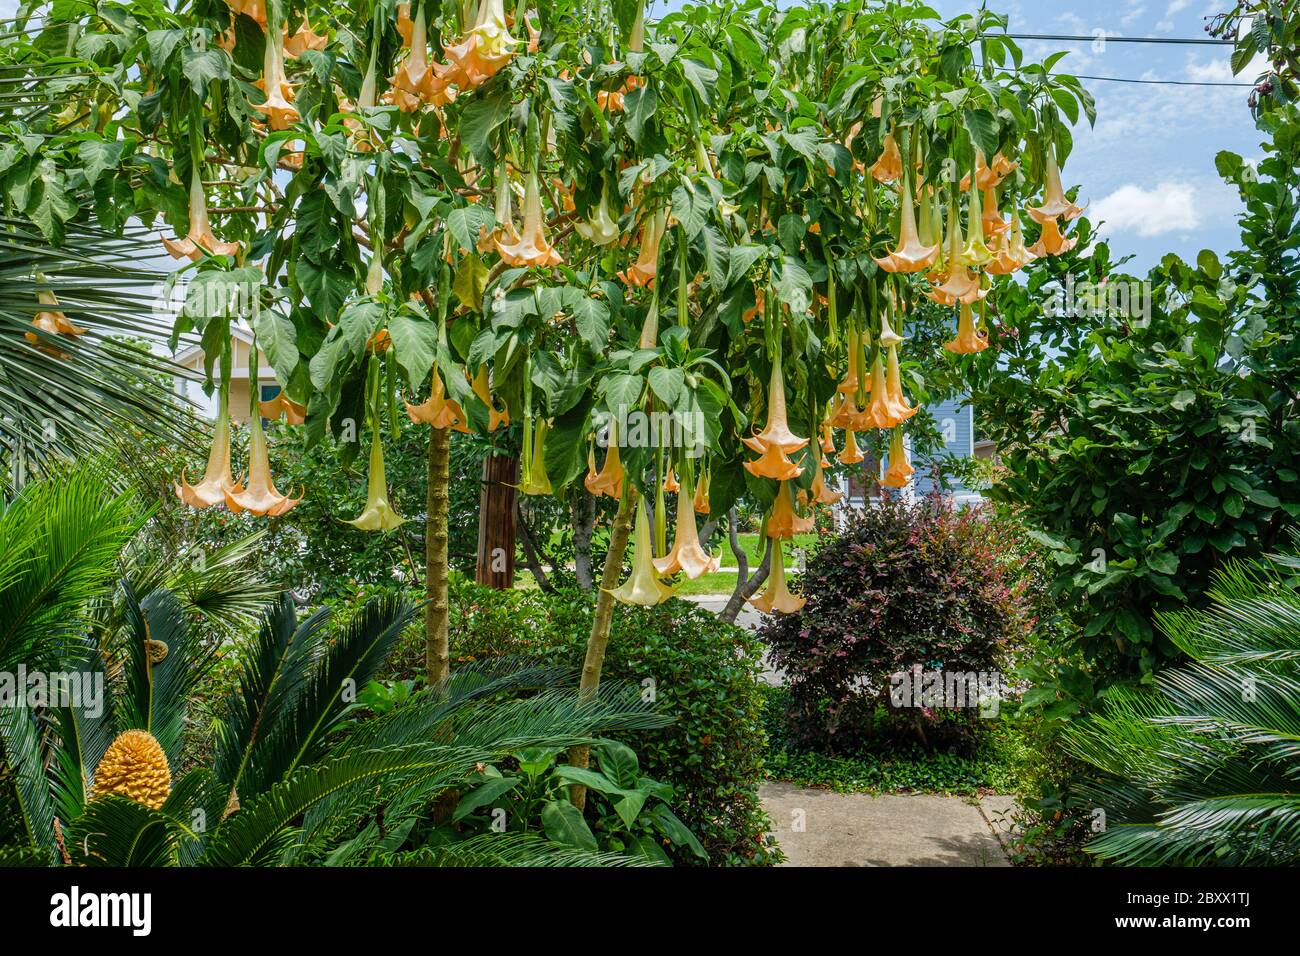 Angel's trumpet plant with sago palm in foreground in landscaping in Gentilly neighborhood of New Orleans, Louisiana, USA Stock Photo